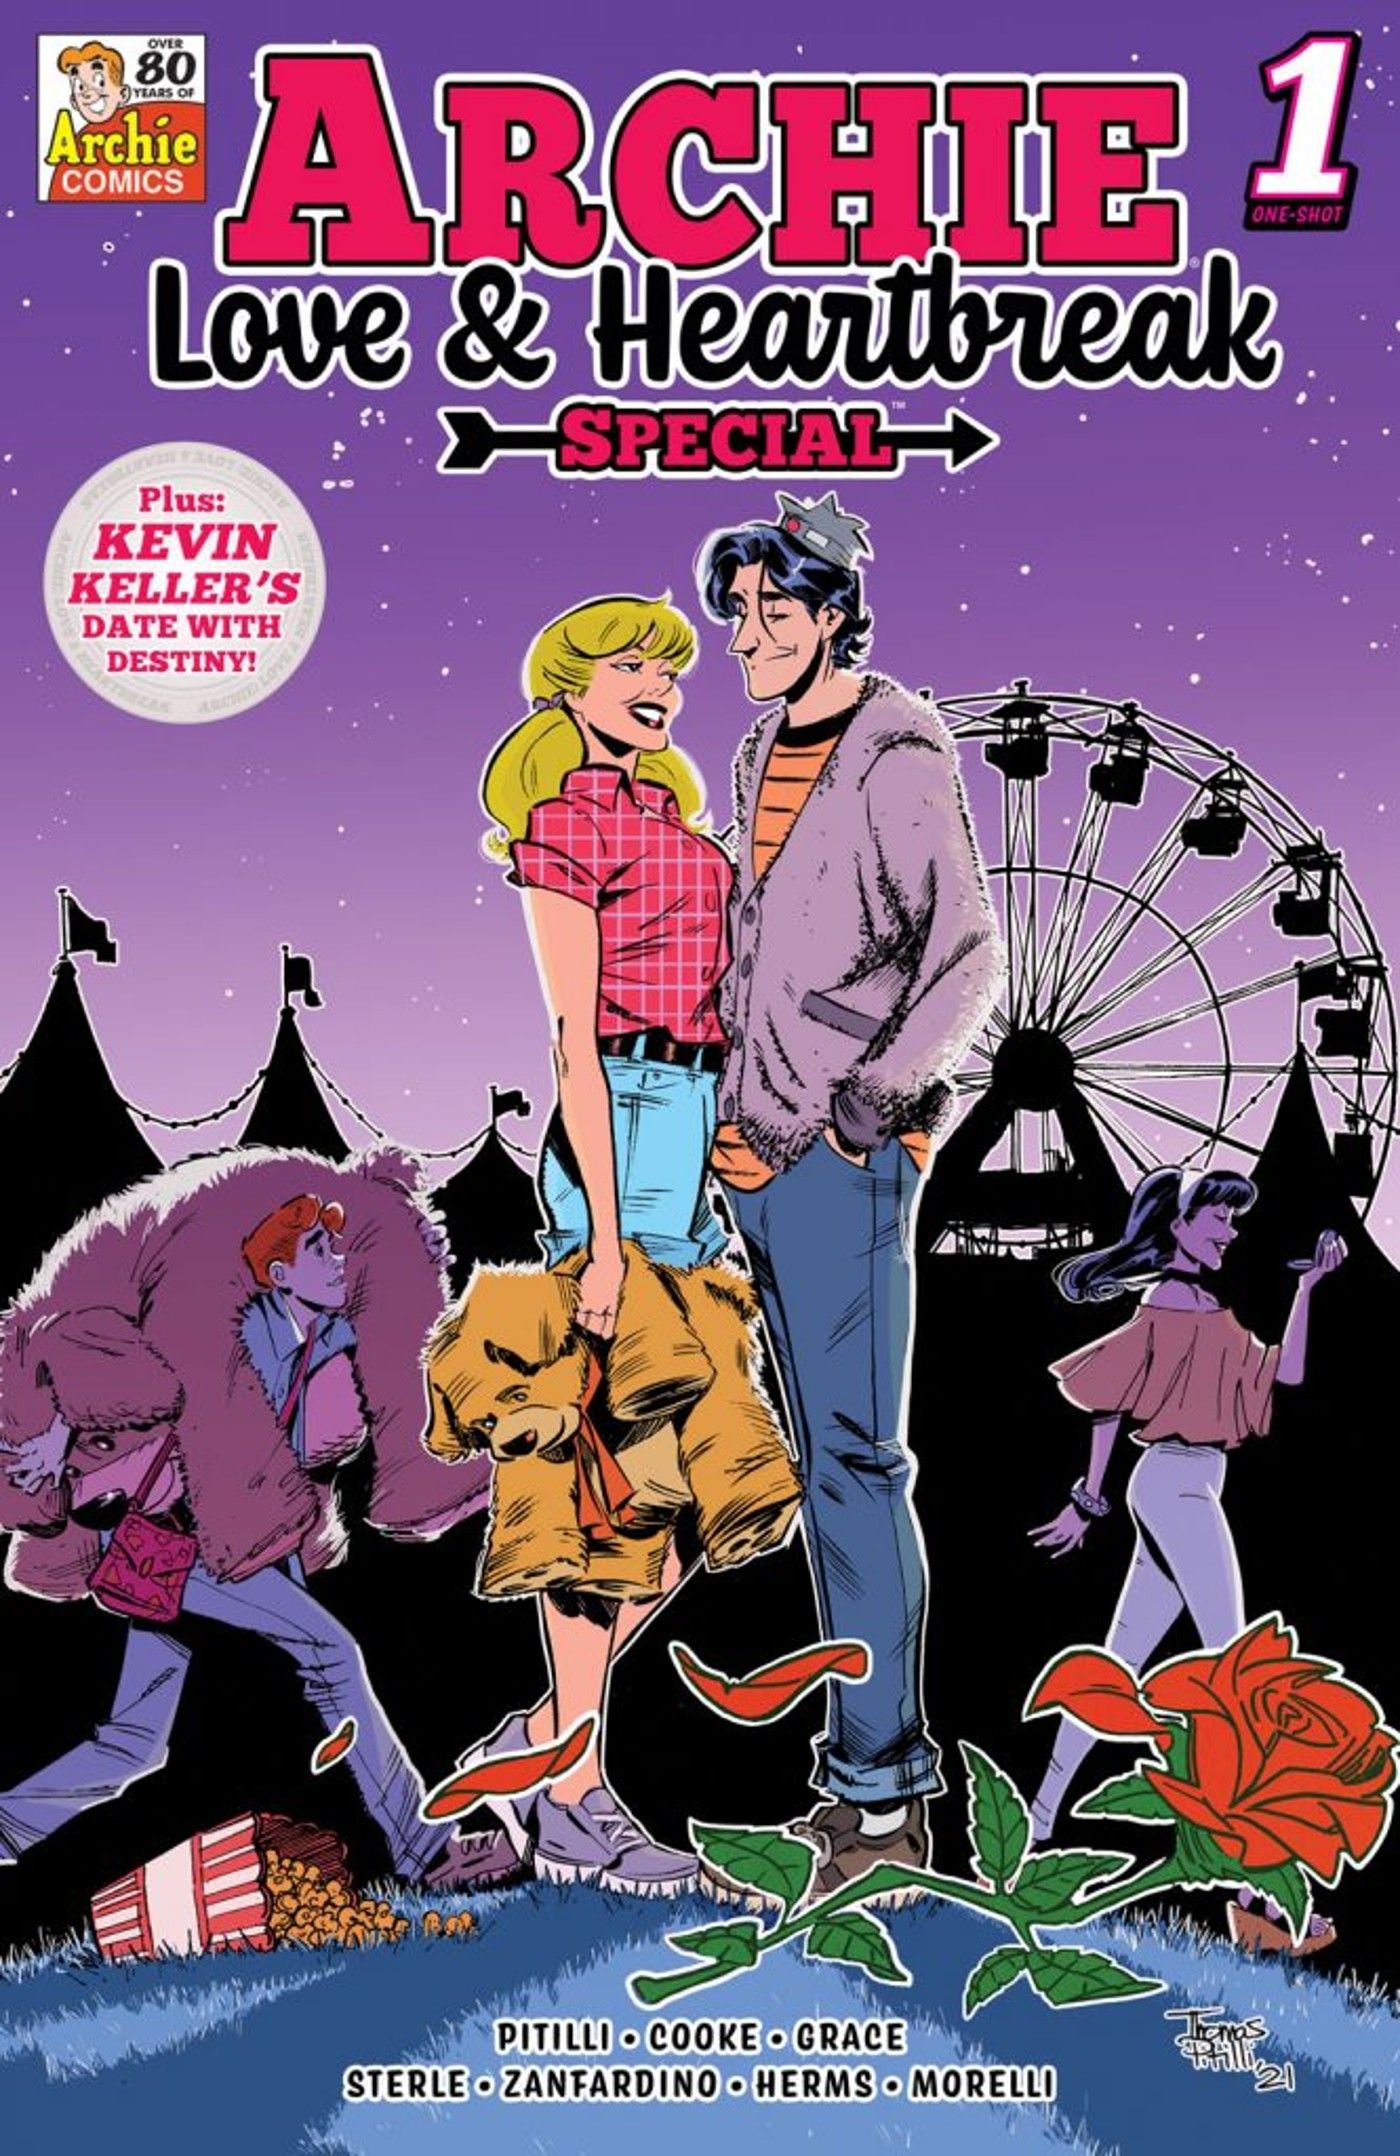 Archie Valentines Day Special Brings Love & Heartbreak To Riverdale